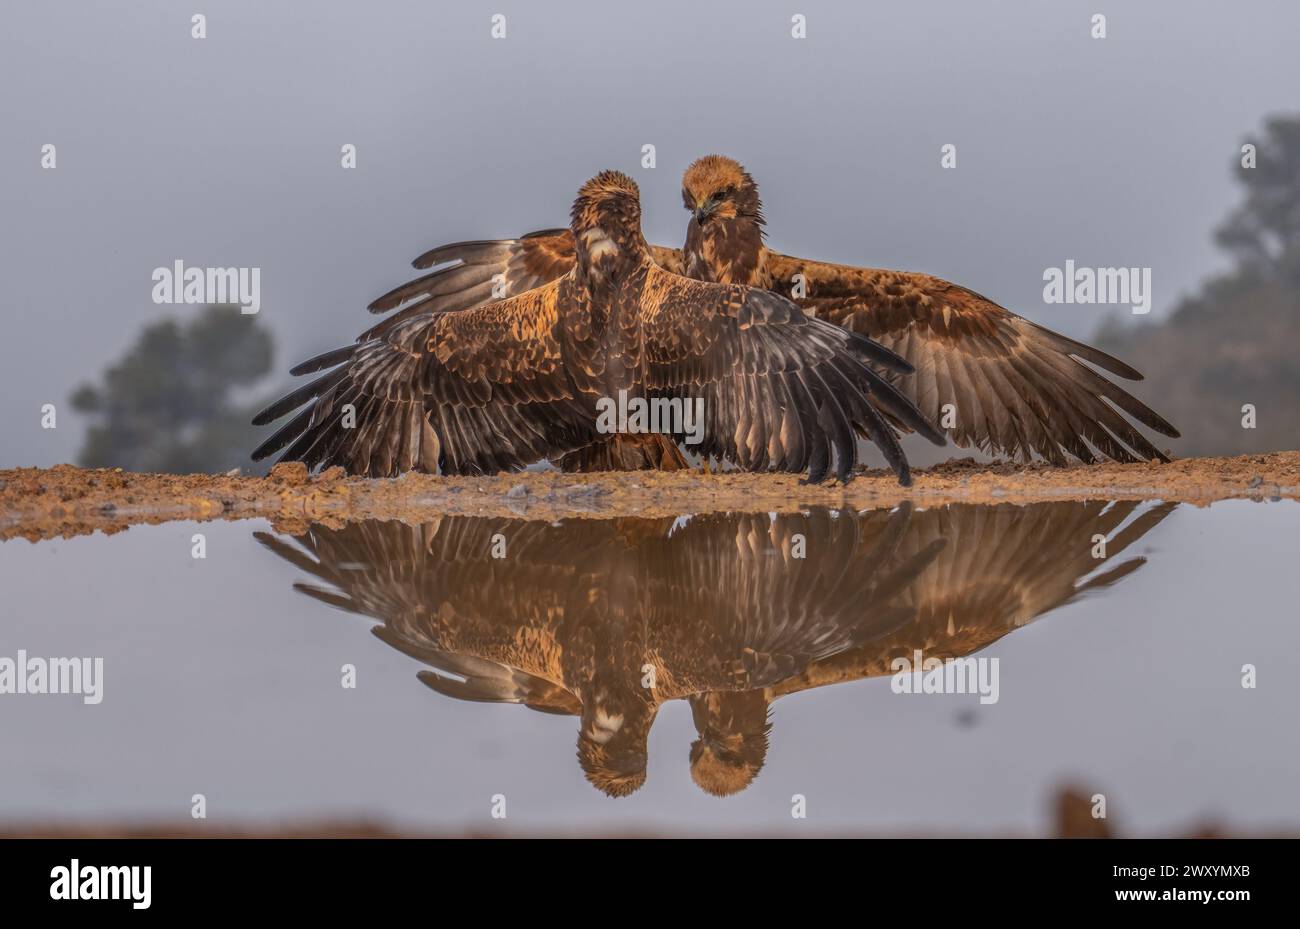 Two Western Marsh Harriers display a winged ballet, their symmetrical poses perfectly captured in the serene waters of Lleida field Stock Photo